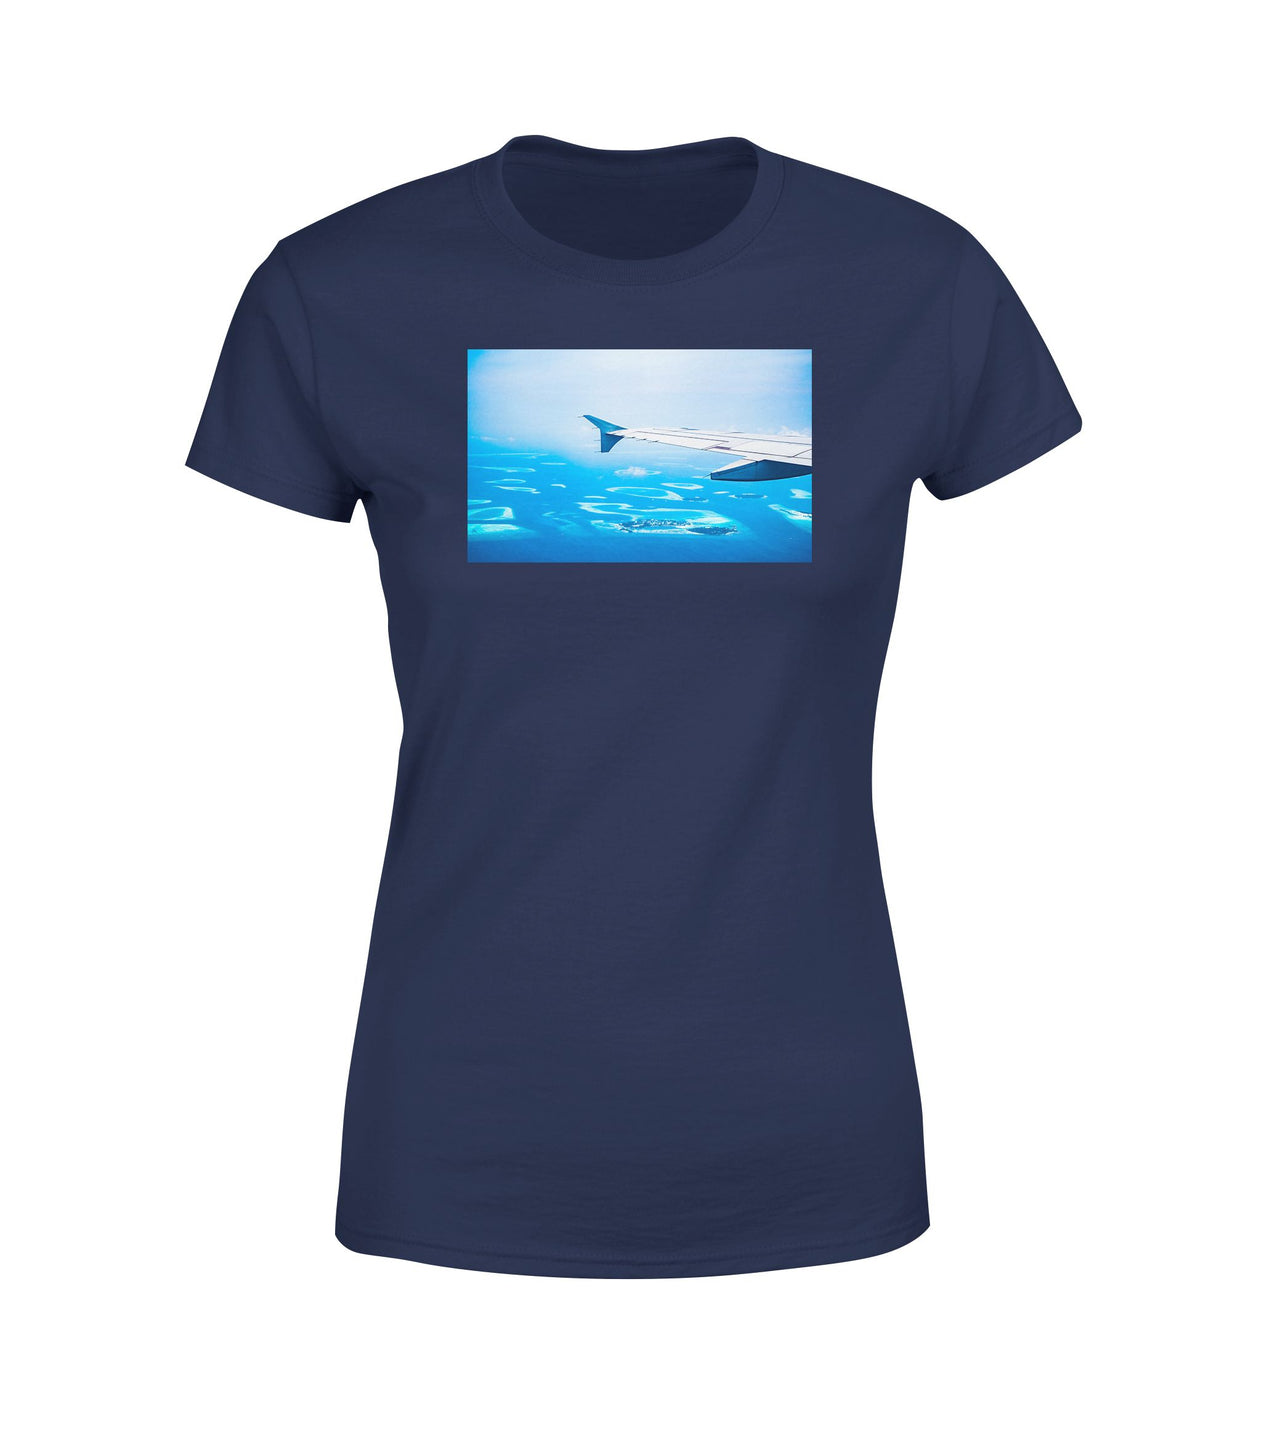 Outstanding View Through Airplane Wing Designed Women T-Shirts